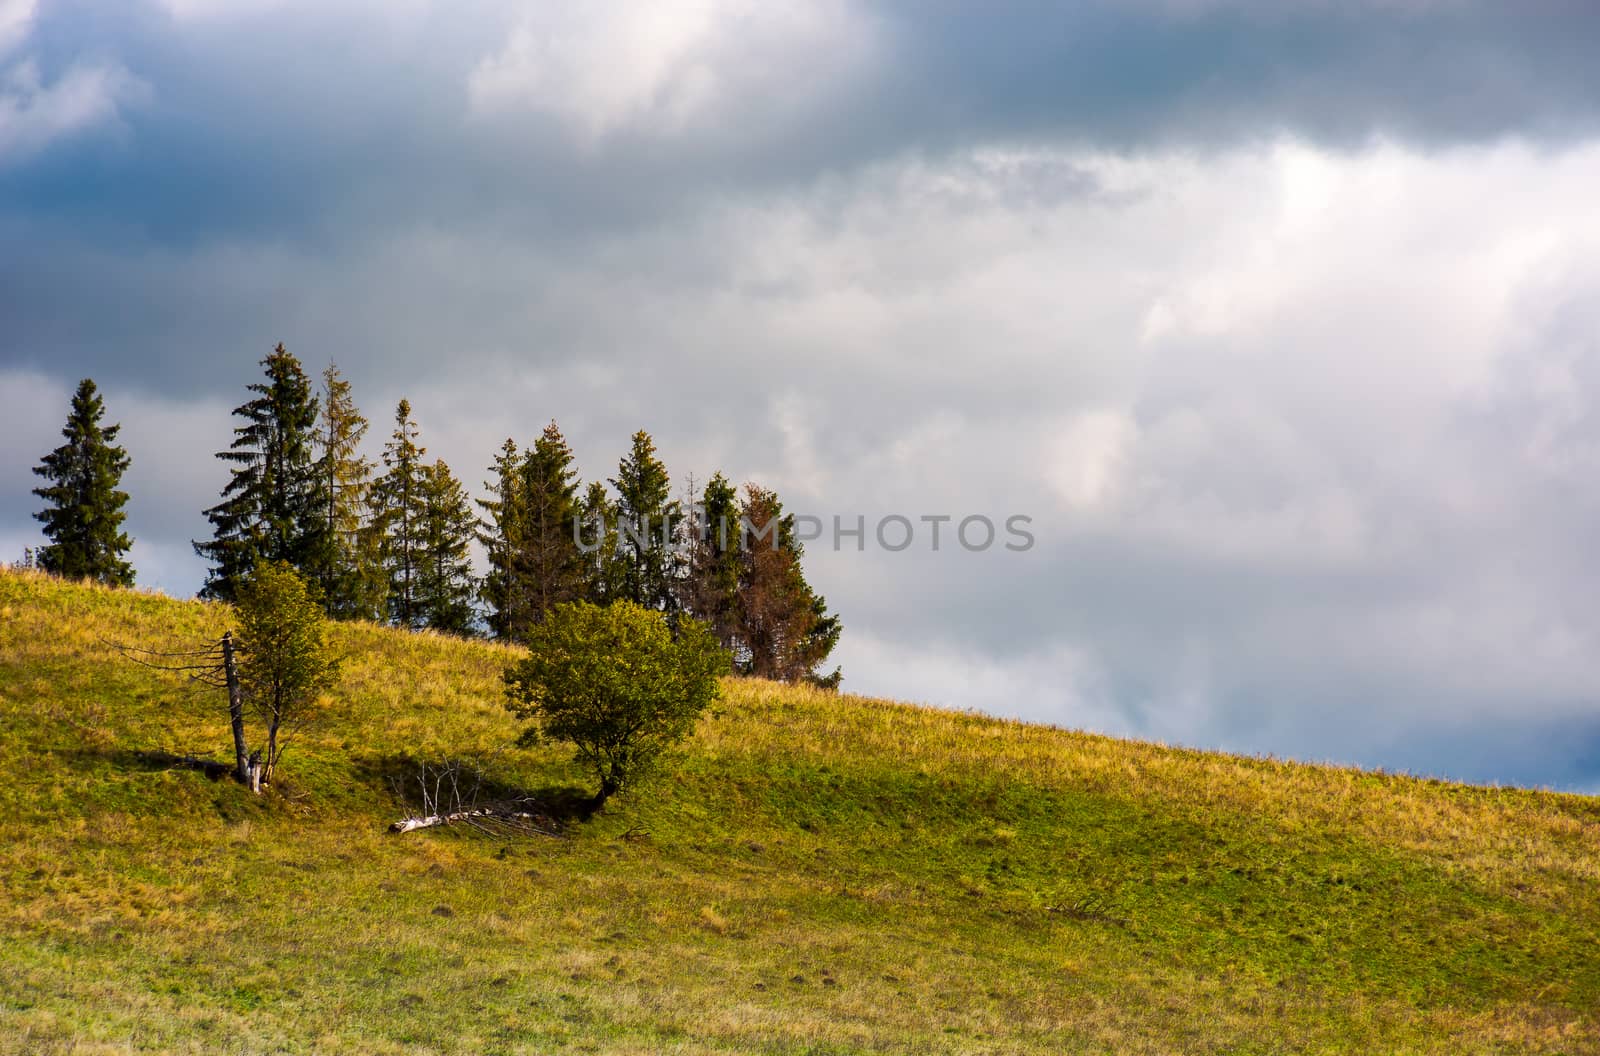 trees on the grassy hillside on an overcast day. beautiful nature scenery